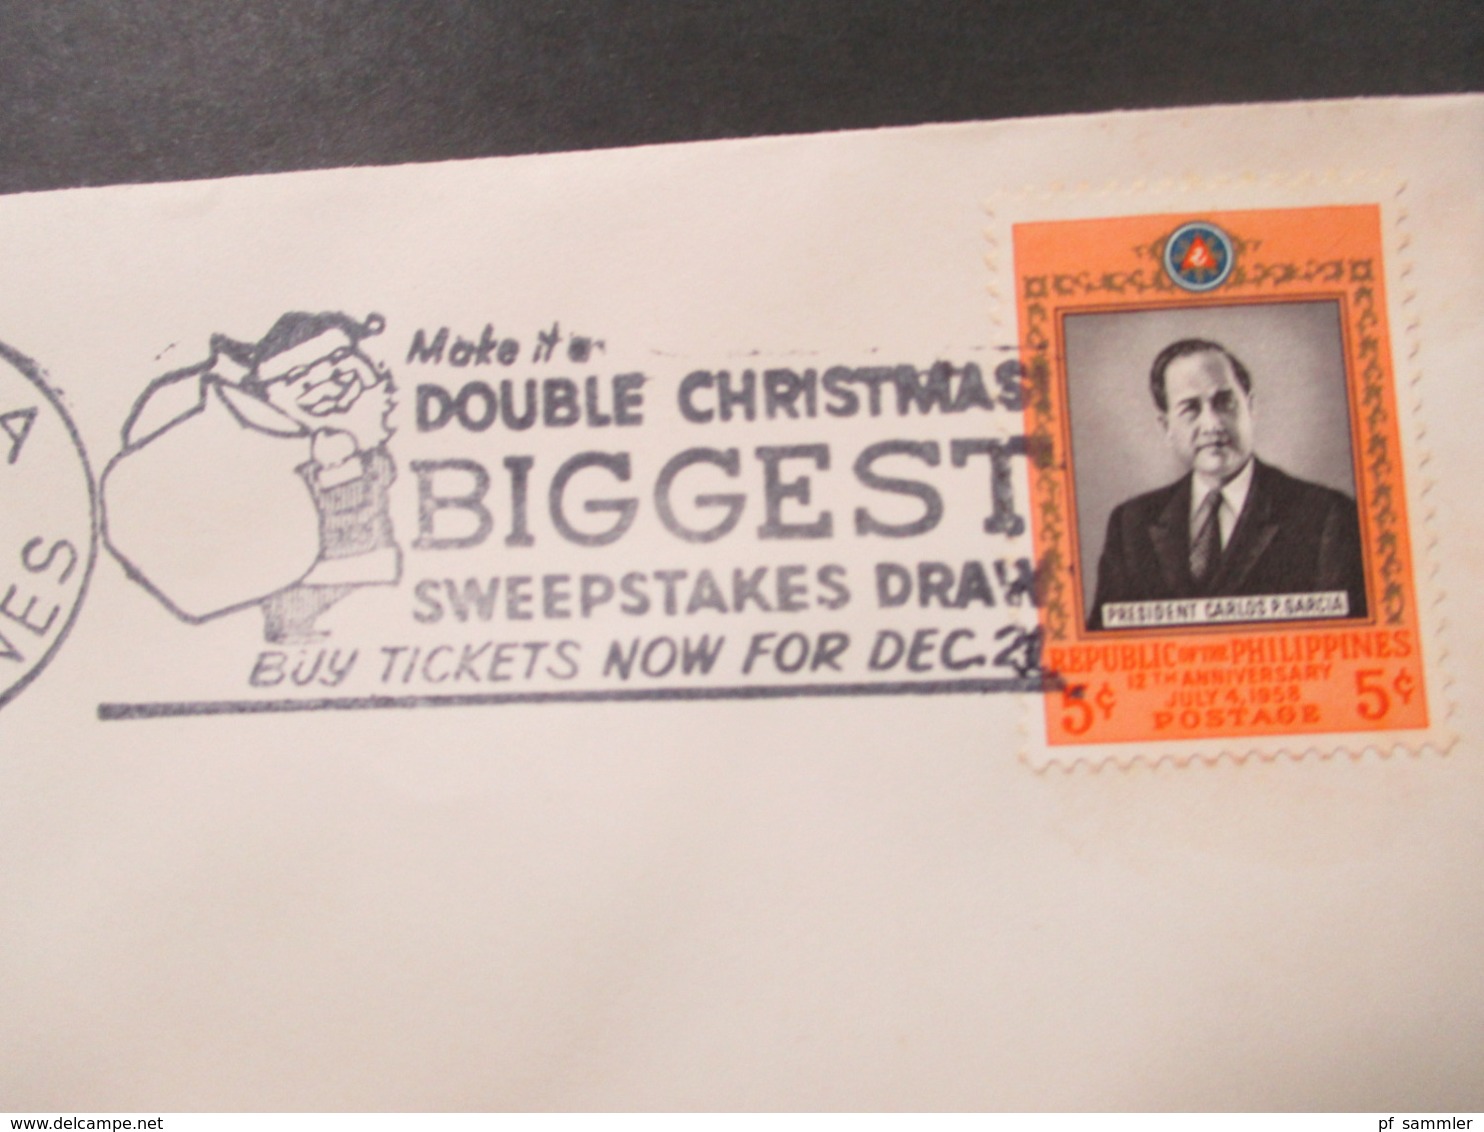 Philippinen 1958 Weihnachts Stempel / Christmas Cancel Santa Claus Make It Double Christmas Biggest Sweepstakes Draw - Kerstmis